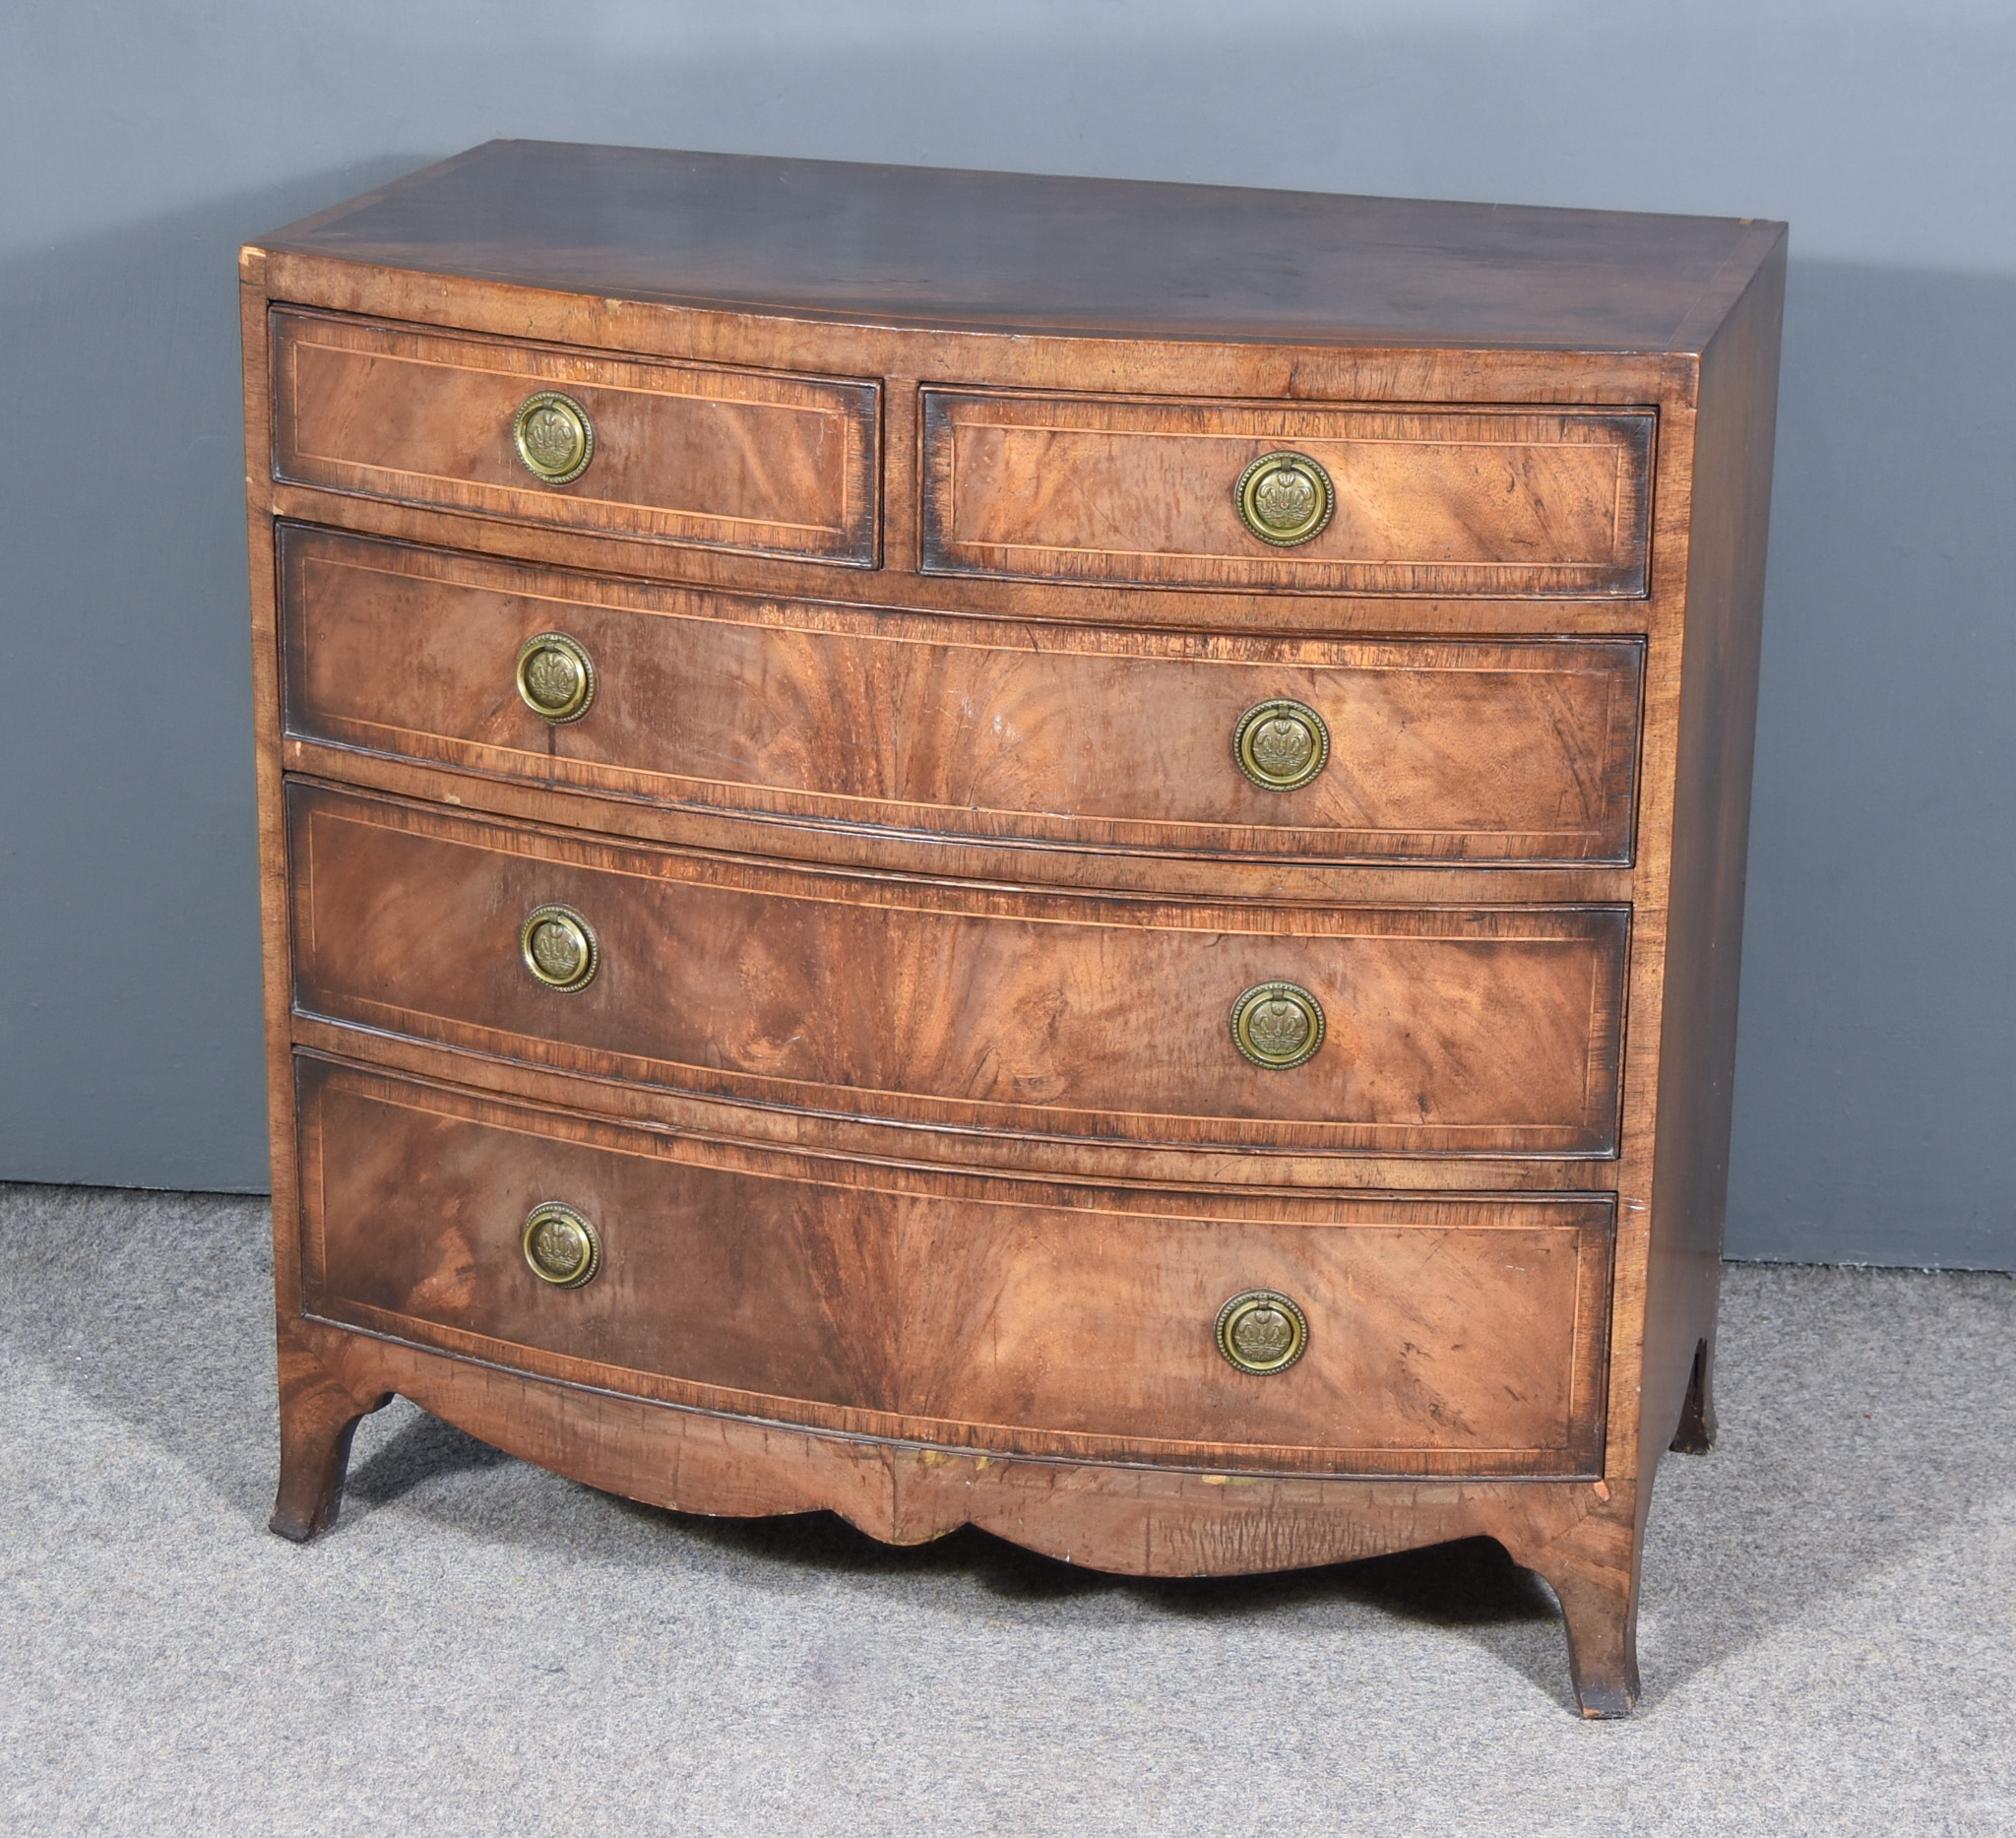 A Mahogany Bow Front Chest of Georgian Design, inlaid with stringings and cross bandings, with